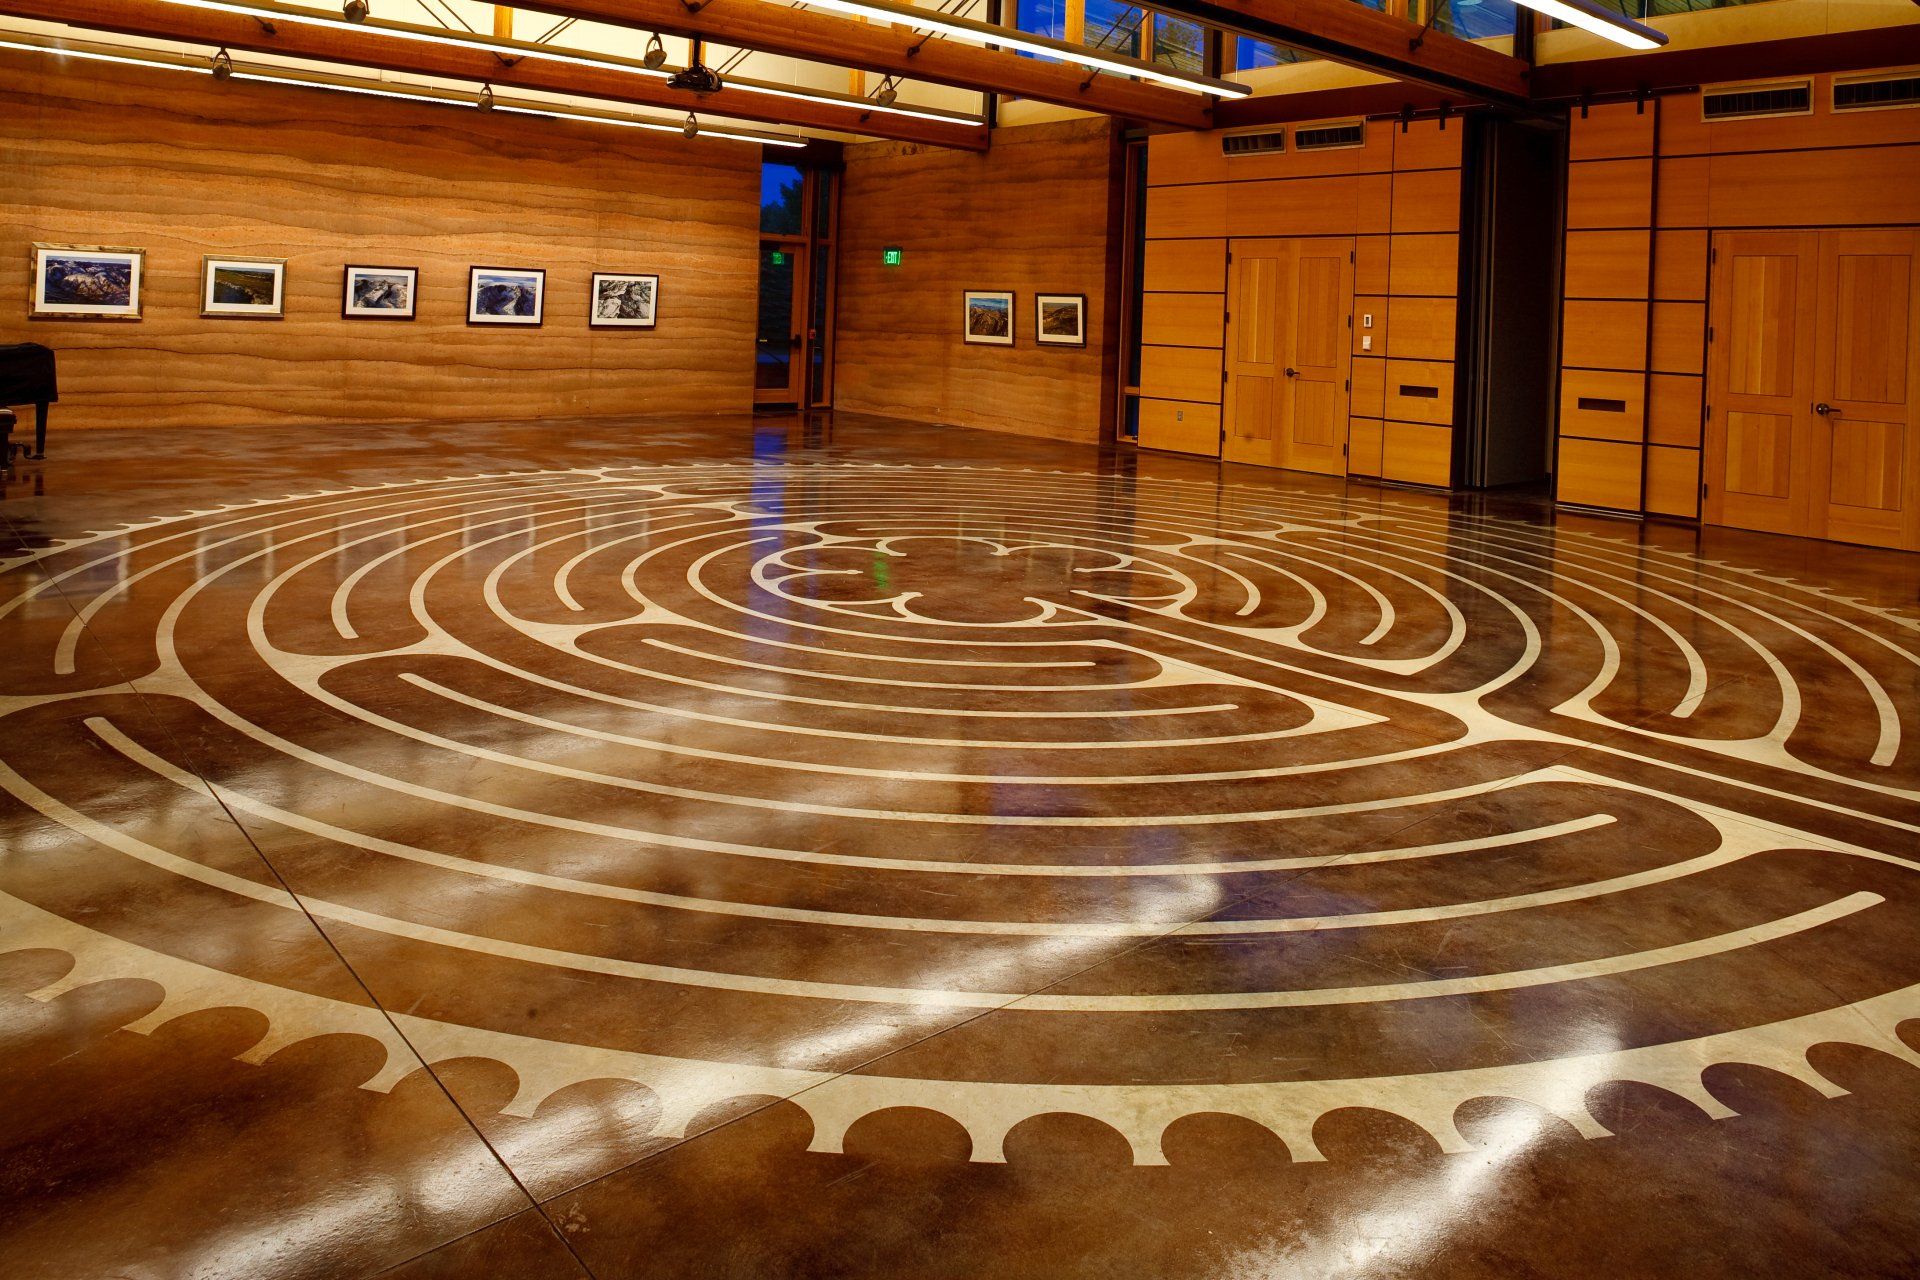 sublette county library labyrinth floor